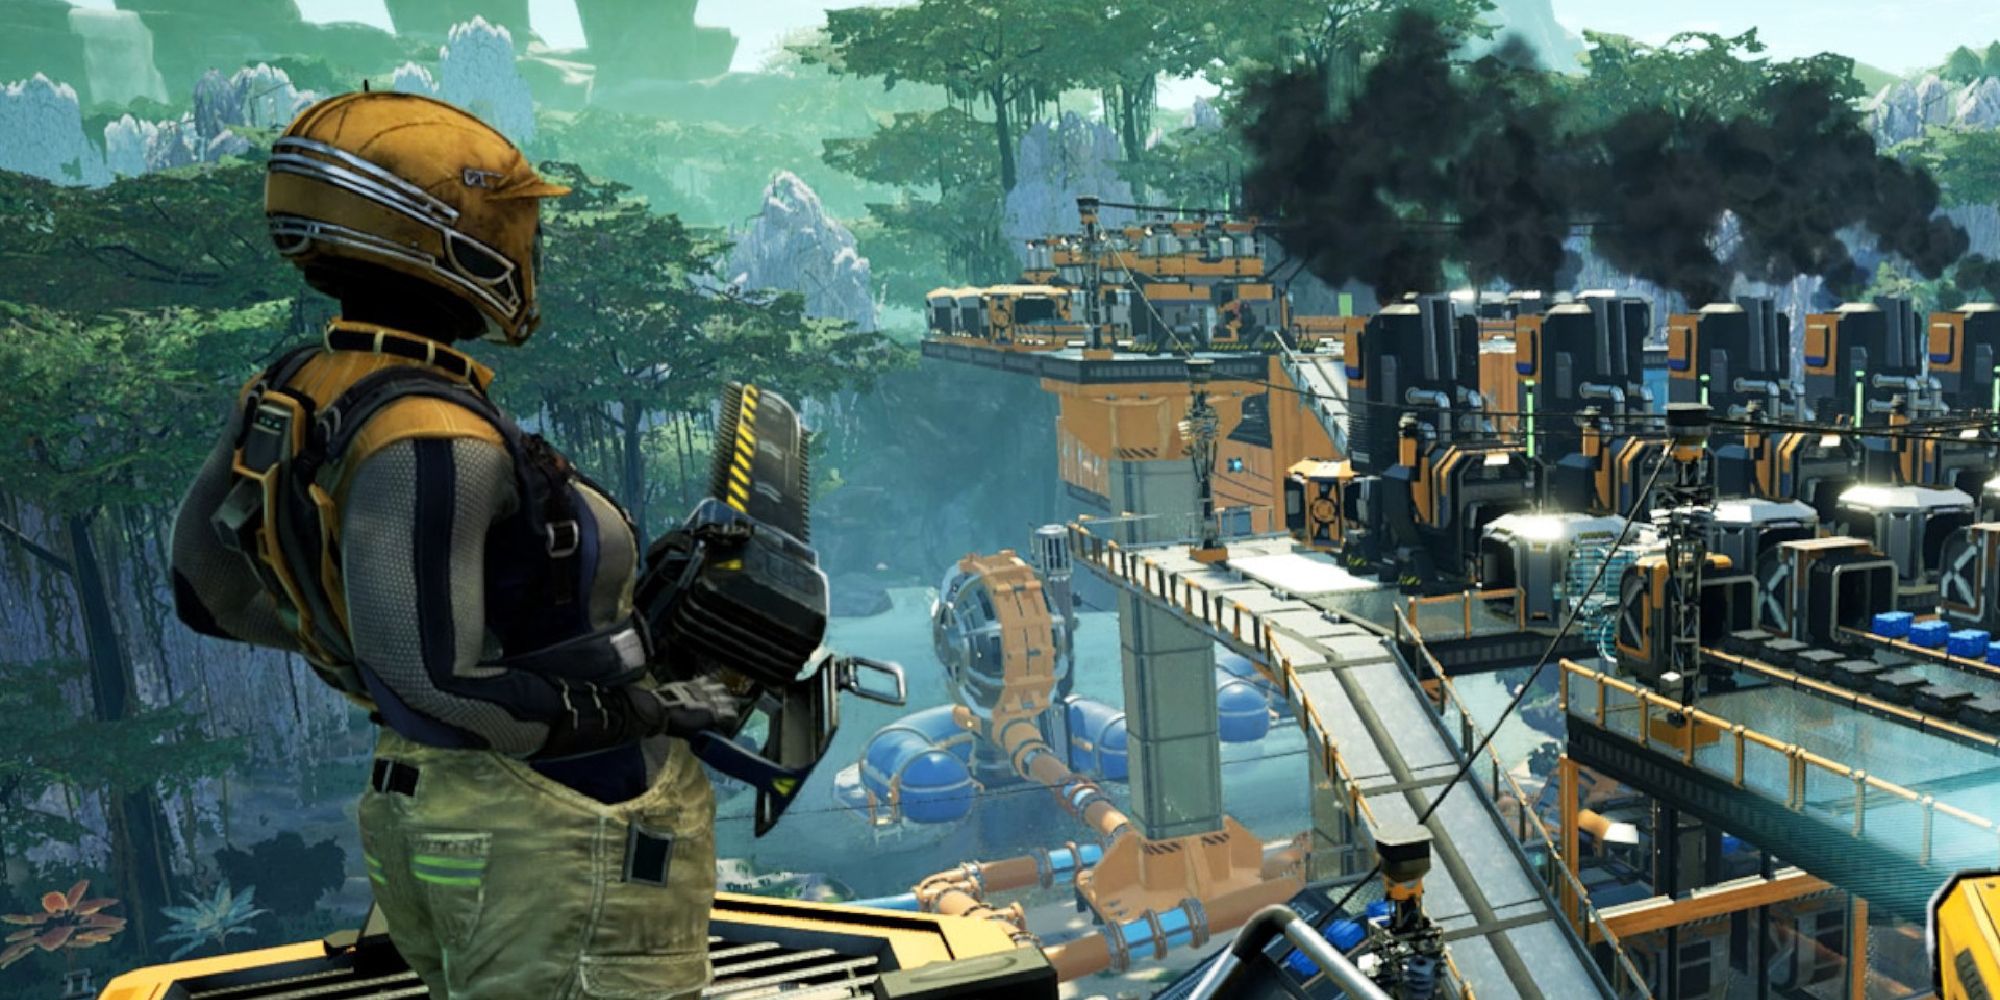 A woman wields a chainsaw while overlooking what appears to be a futuristic assembly line